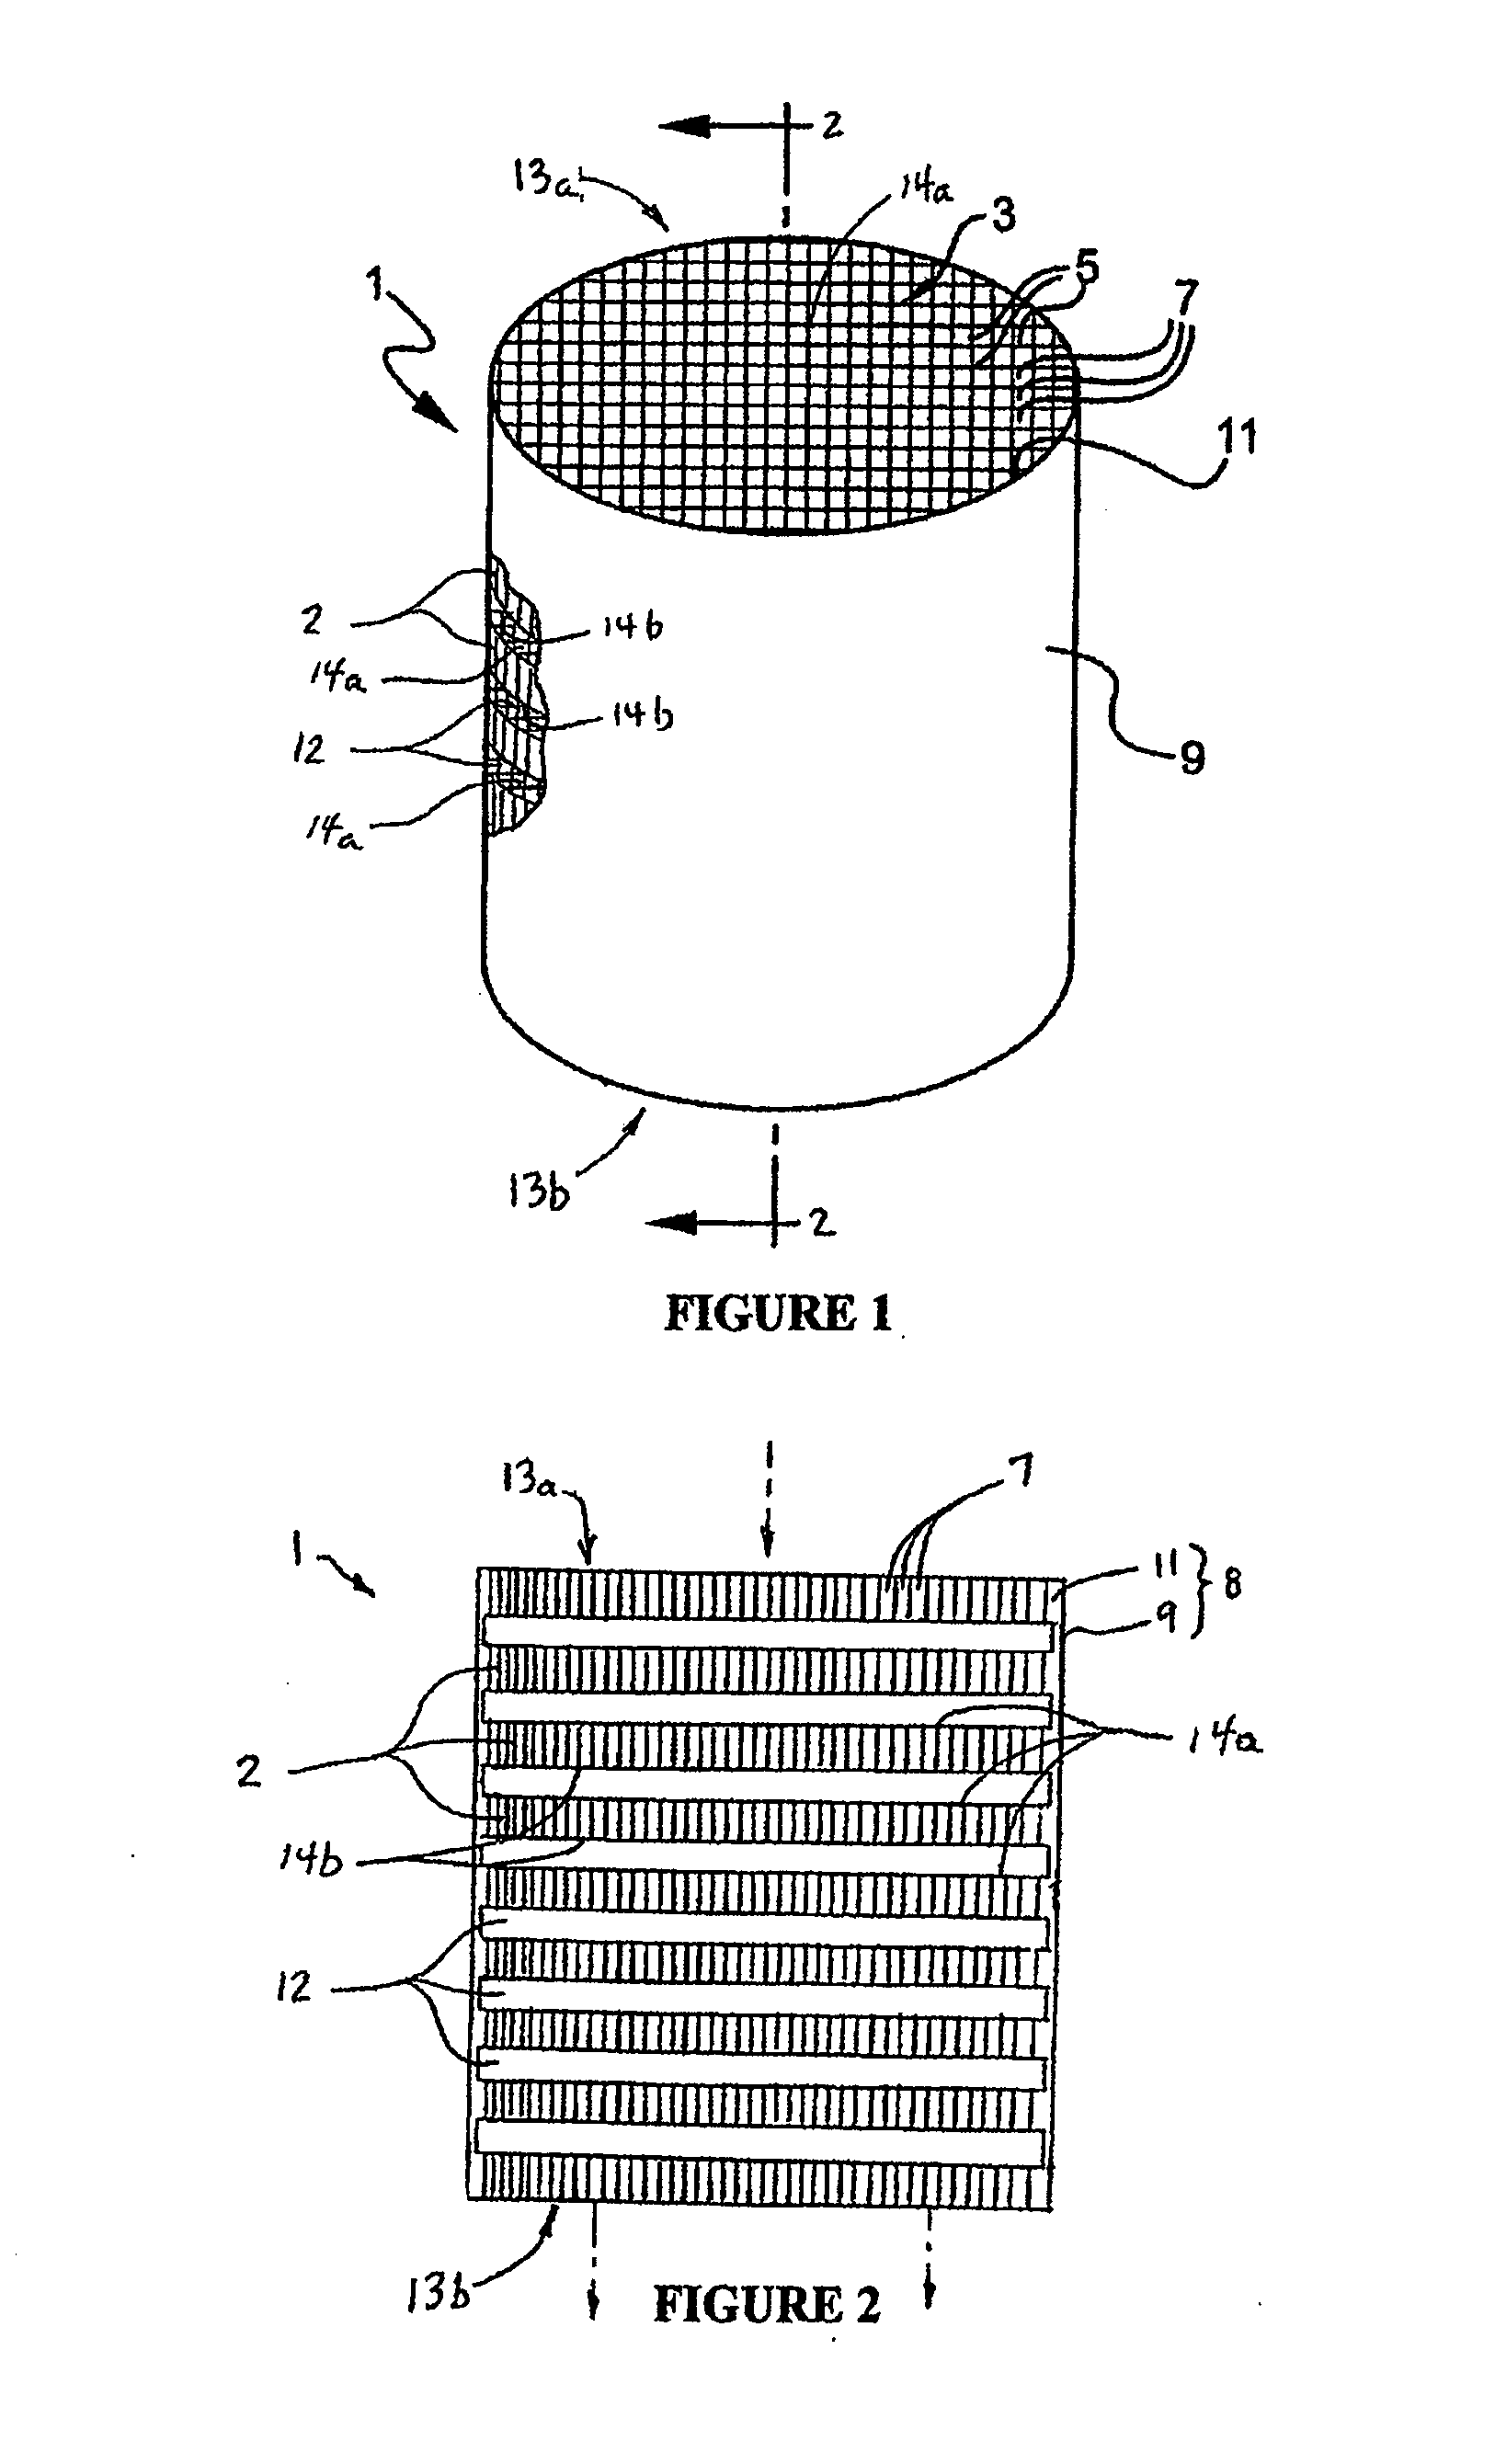 Fluid treatment device having multiple layer honeycomb structure and method of manufacture